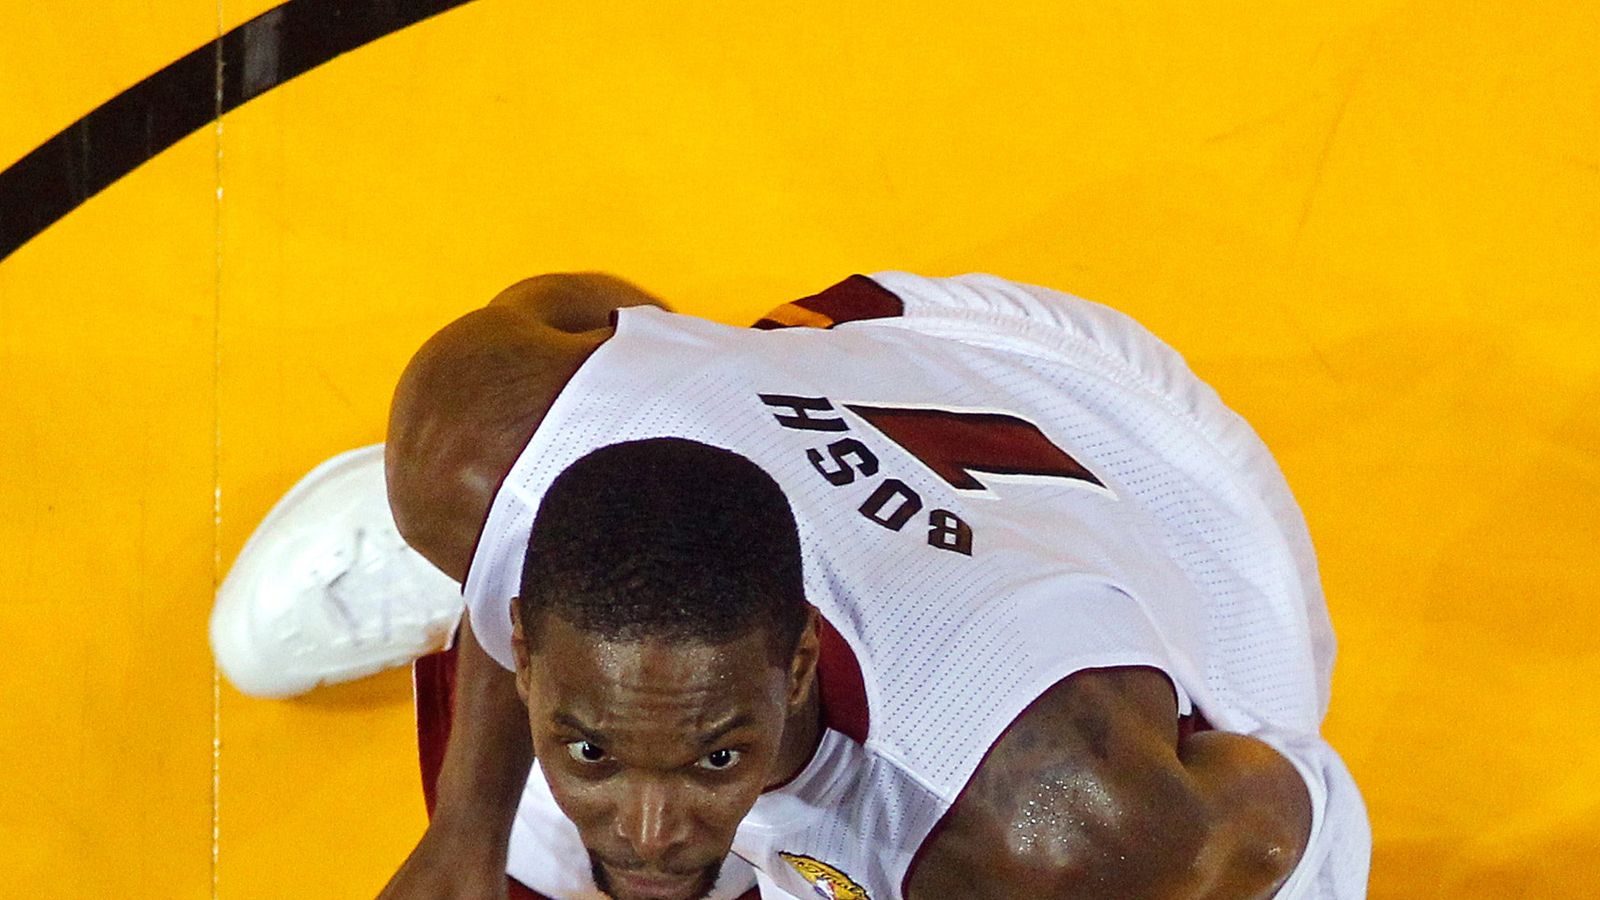 Unique focus carried Chris Bosh into Hall of Fame